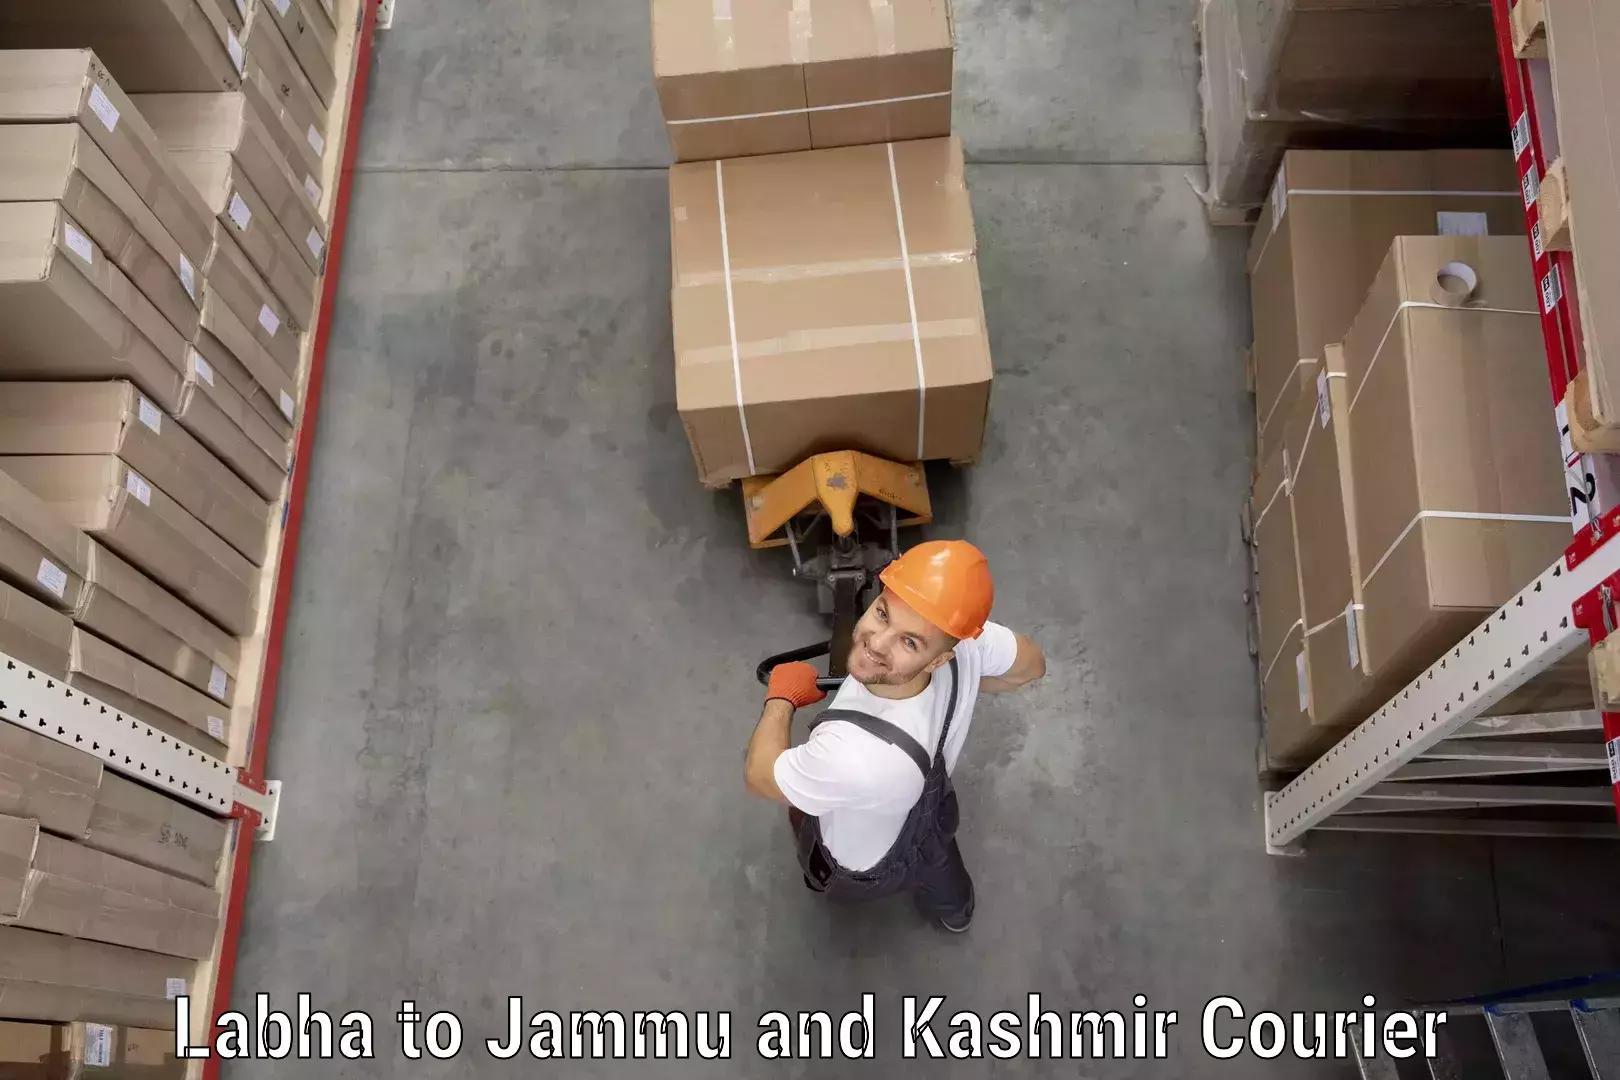 Efficient courier operations Labha to Jammu